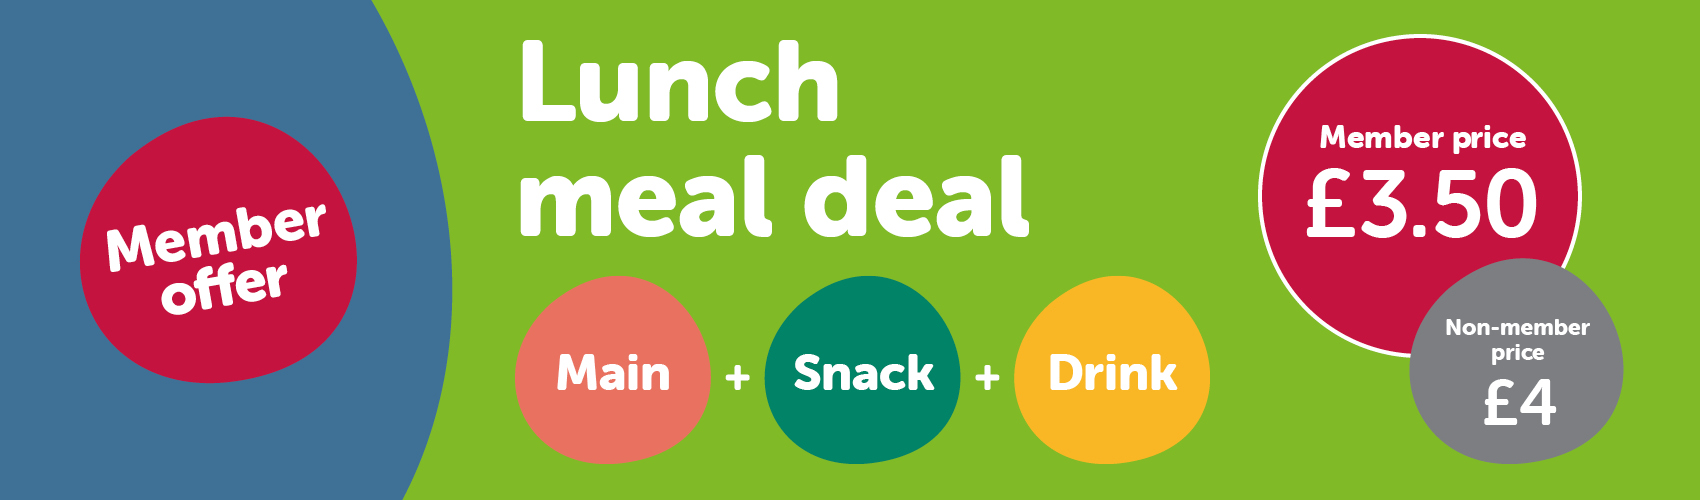 25113 Midcounties Lunch Meal Deal Web Asset 1700x500px.jpg